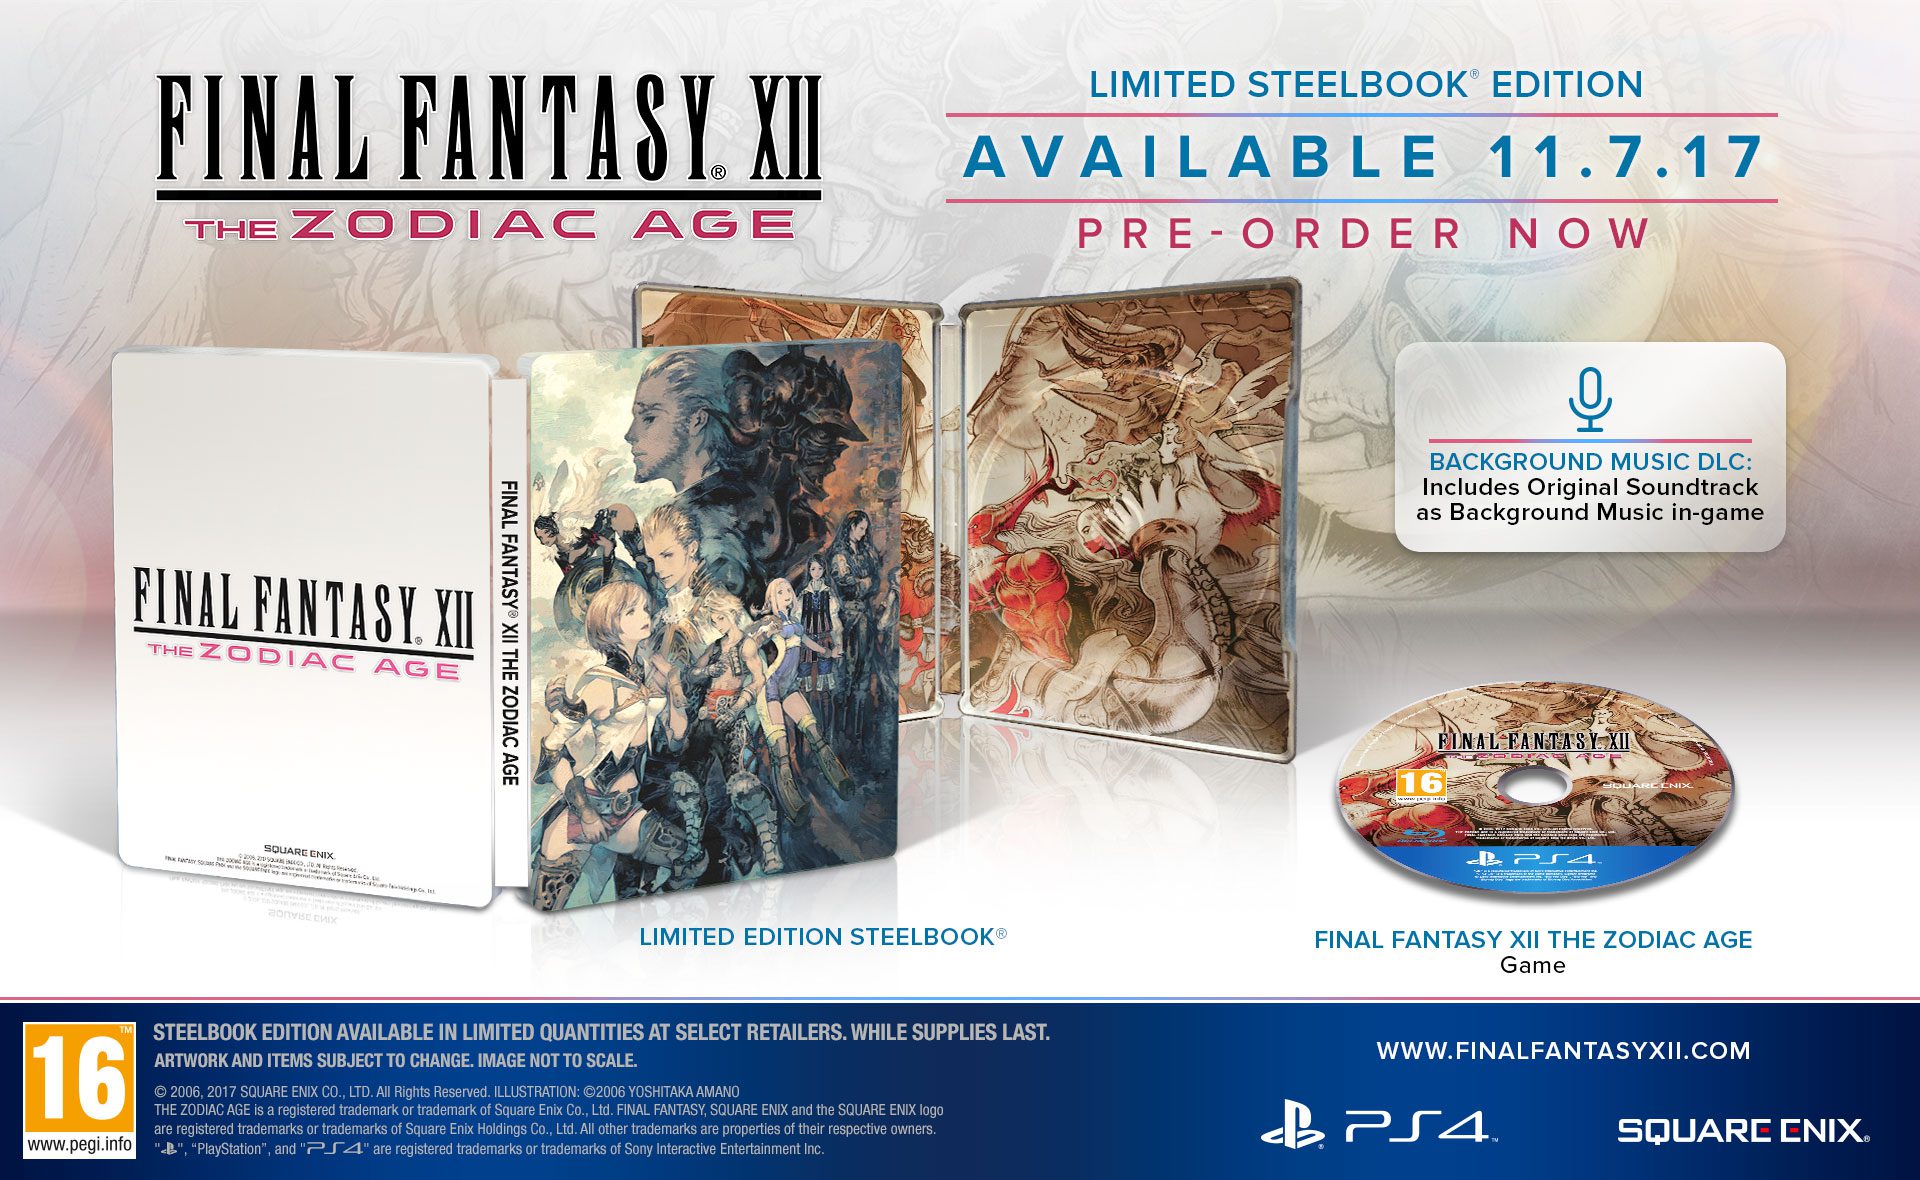 Available limit. Final Fantasy XII: the Zodiac age. Final Fantasy 12 the Zodiac. Final Fantasy Zodiac age. Final Fantasy XII: Collector's Edition.